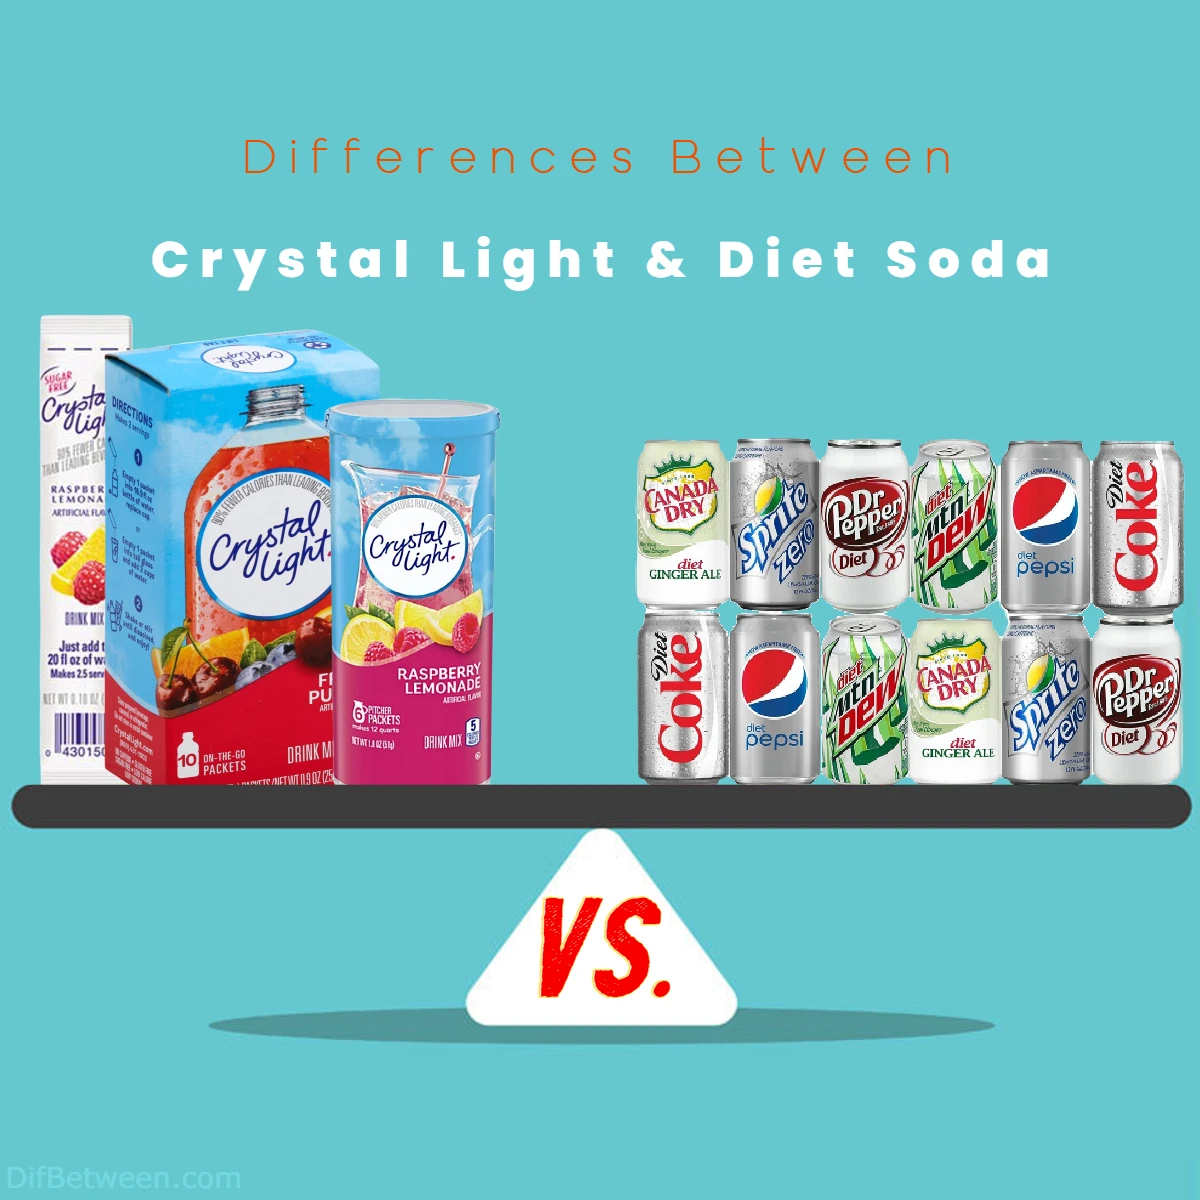 Differences Between Crystal Light and Diet Soda